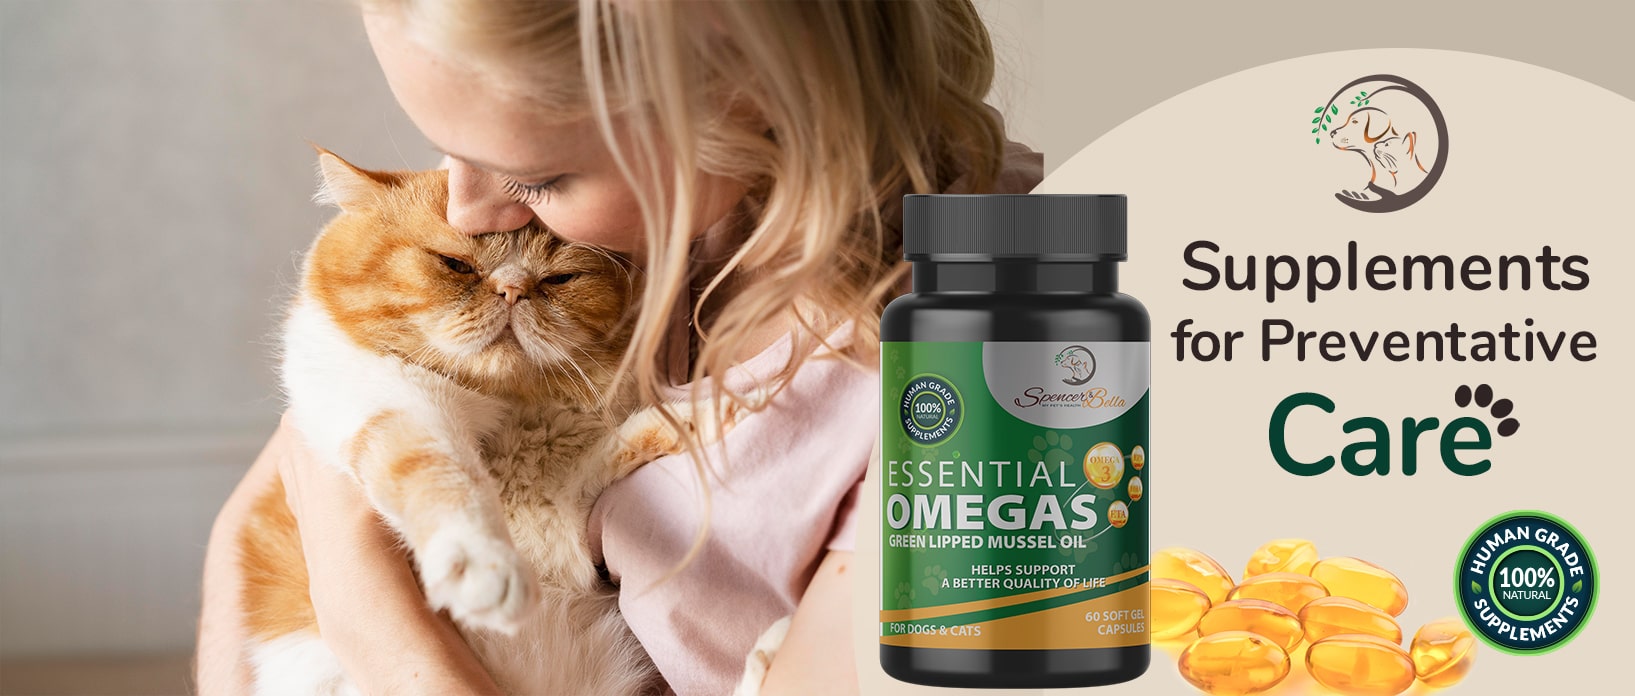 Essential OMEGAS Supplements for Cats help to manage weight and preventative care. 